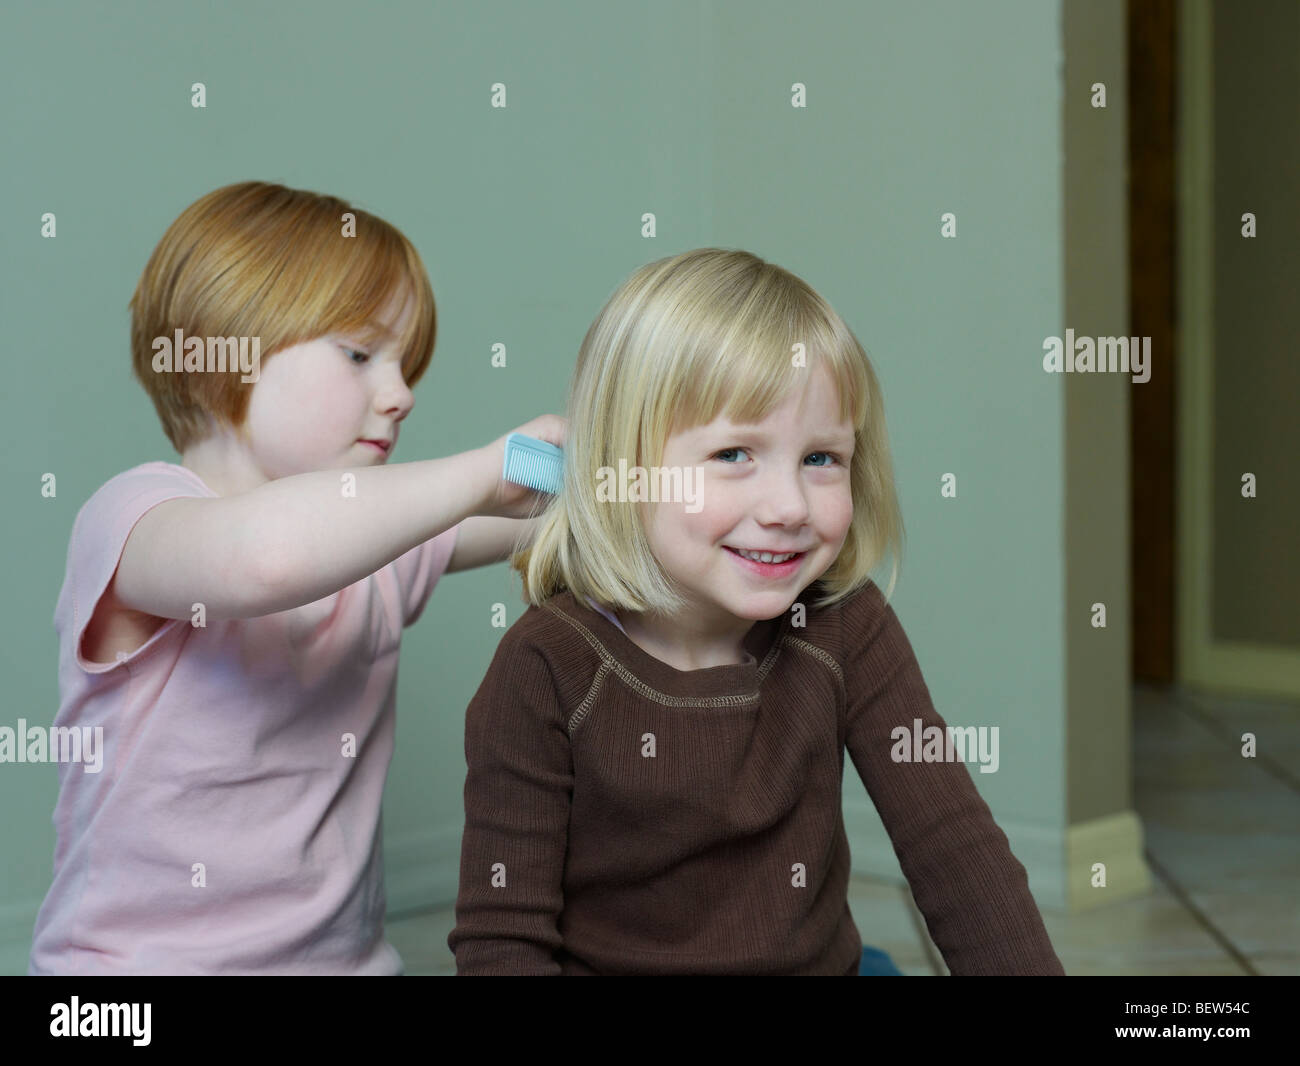 7-8 year old girl combs 4-5 year old girls hair Stock Photo - Alamy